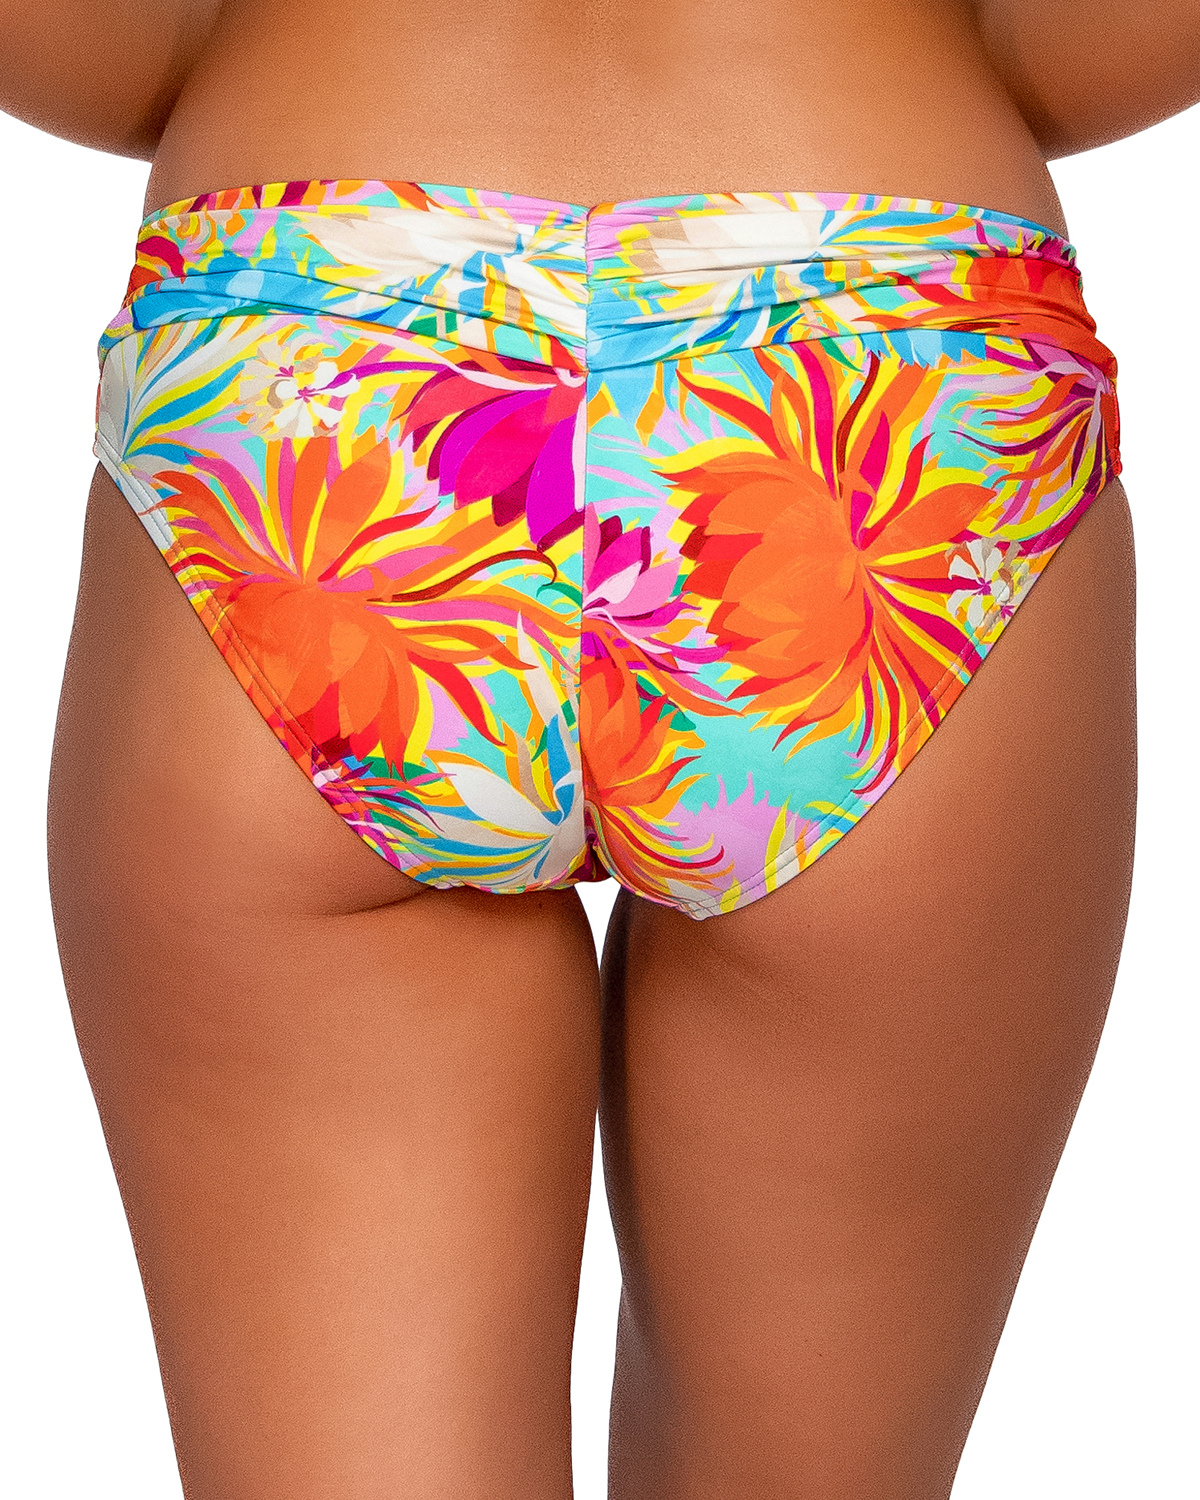 Model wearing a hipster bottom in an orange, yellow, turquoise and pink floral print.